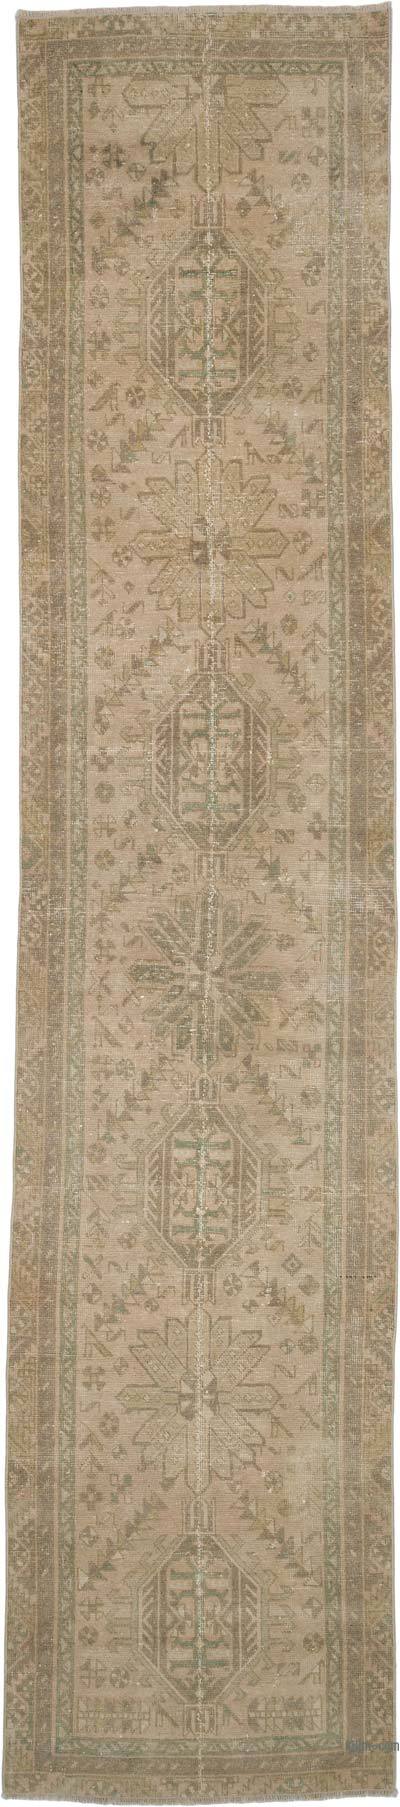 Vintage Oriental Hand-Knotted Runner - 2' 11" x 13' 2" (35 in. x 158 in.)